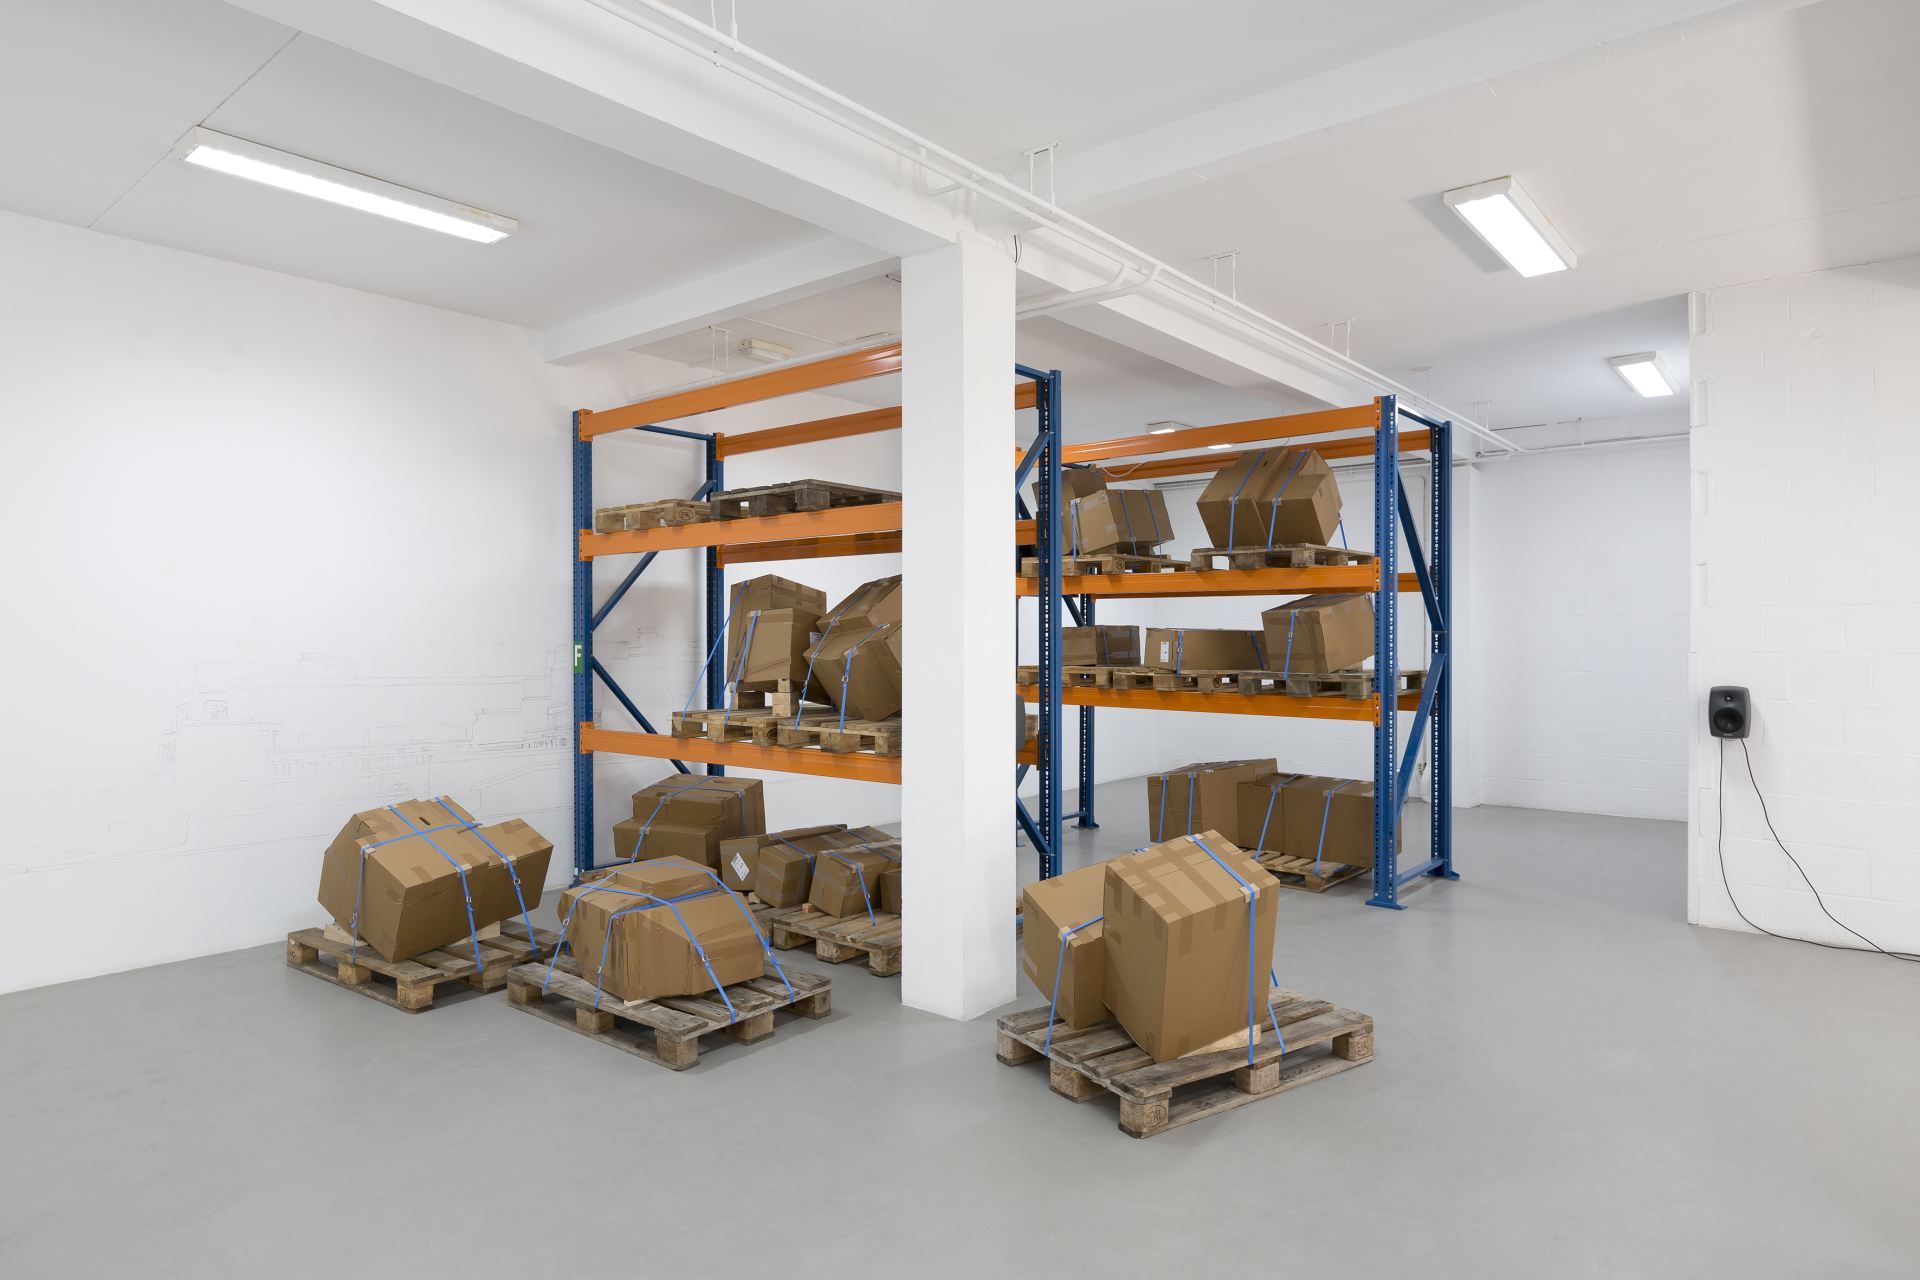 Installation shots of a room fitted with shelves and decorated with cardboard boxes on pallets.